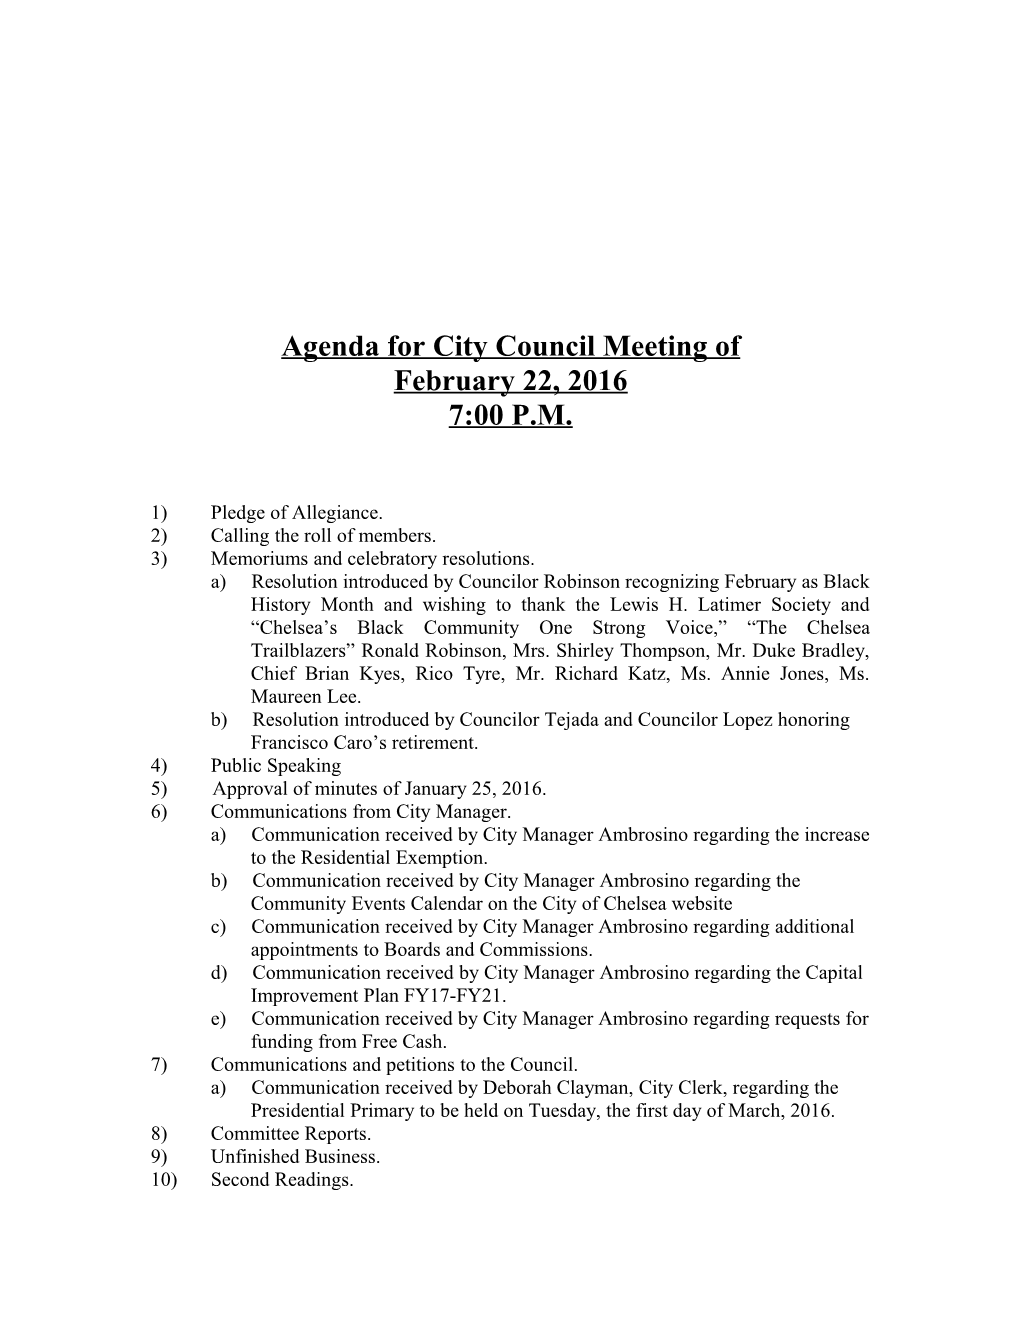 Agenda for City Council Meeting Of